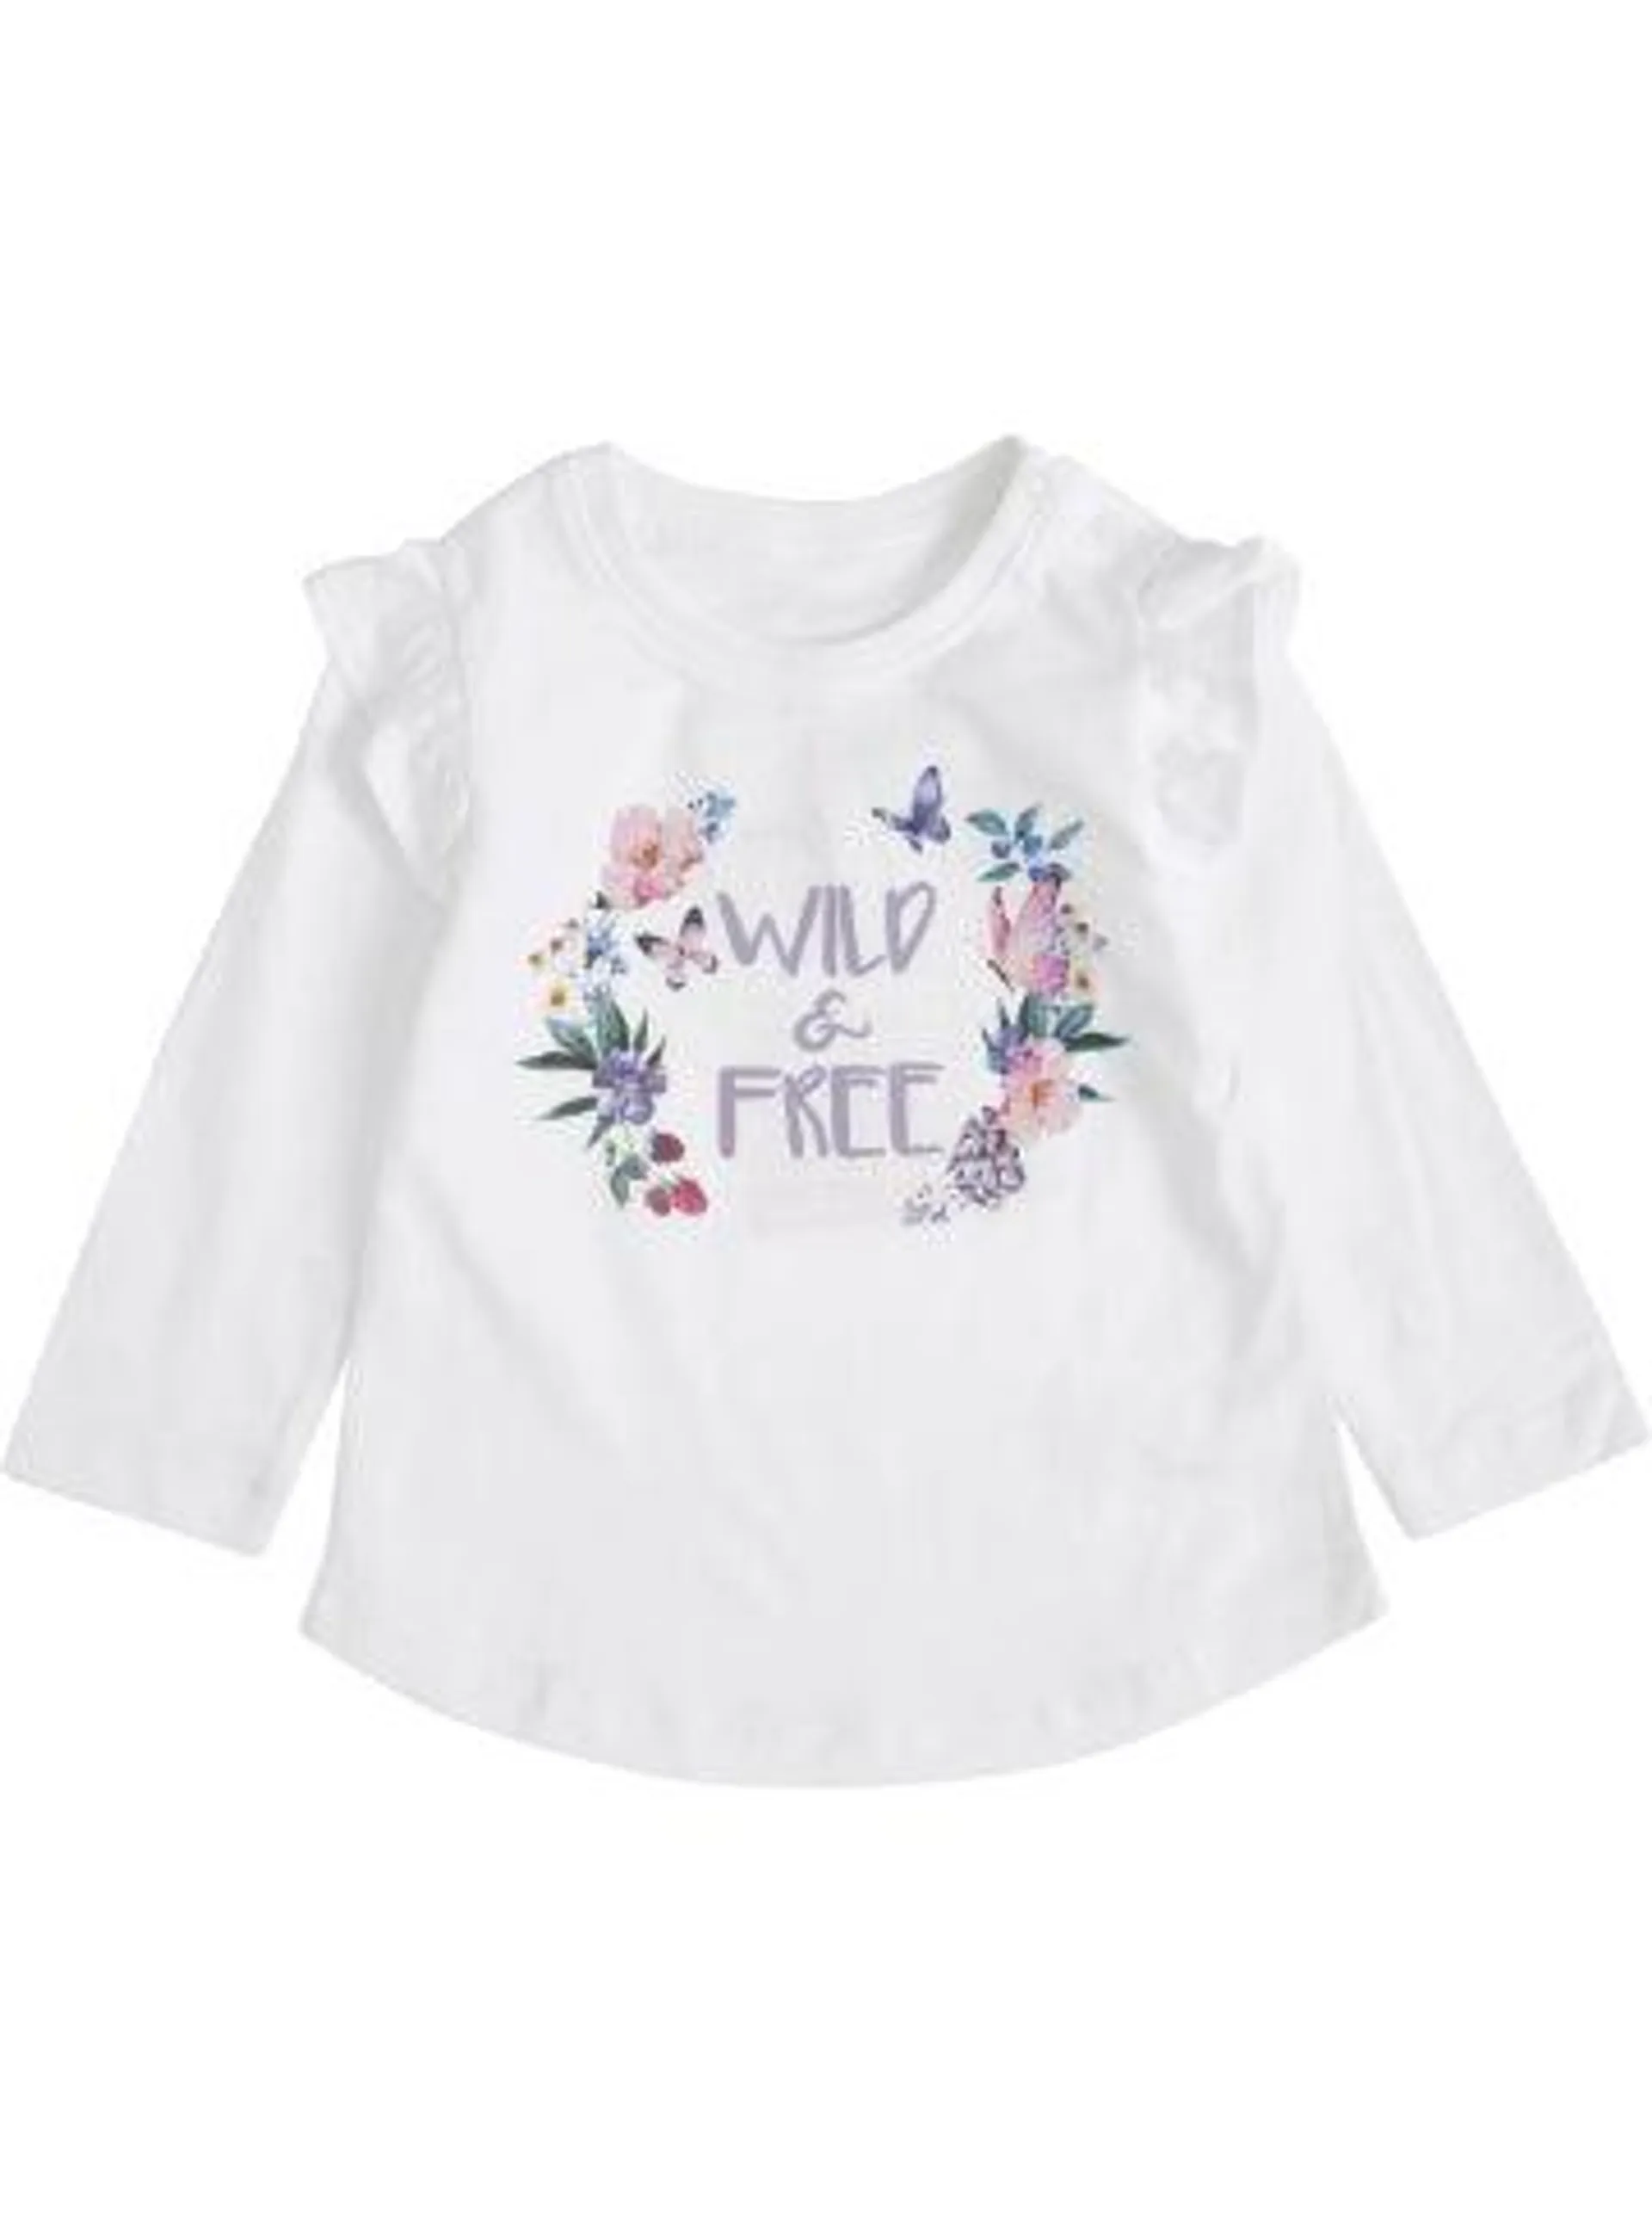 Babies' Frill Print Long Sleeve Tee in White Wild